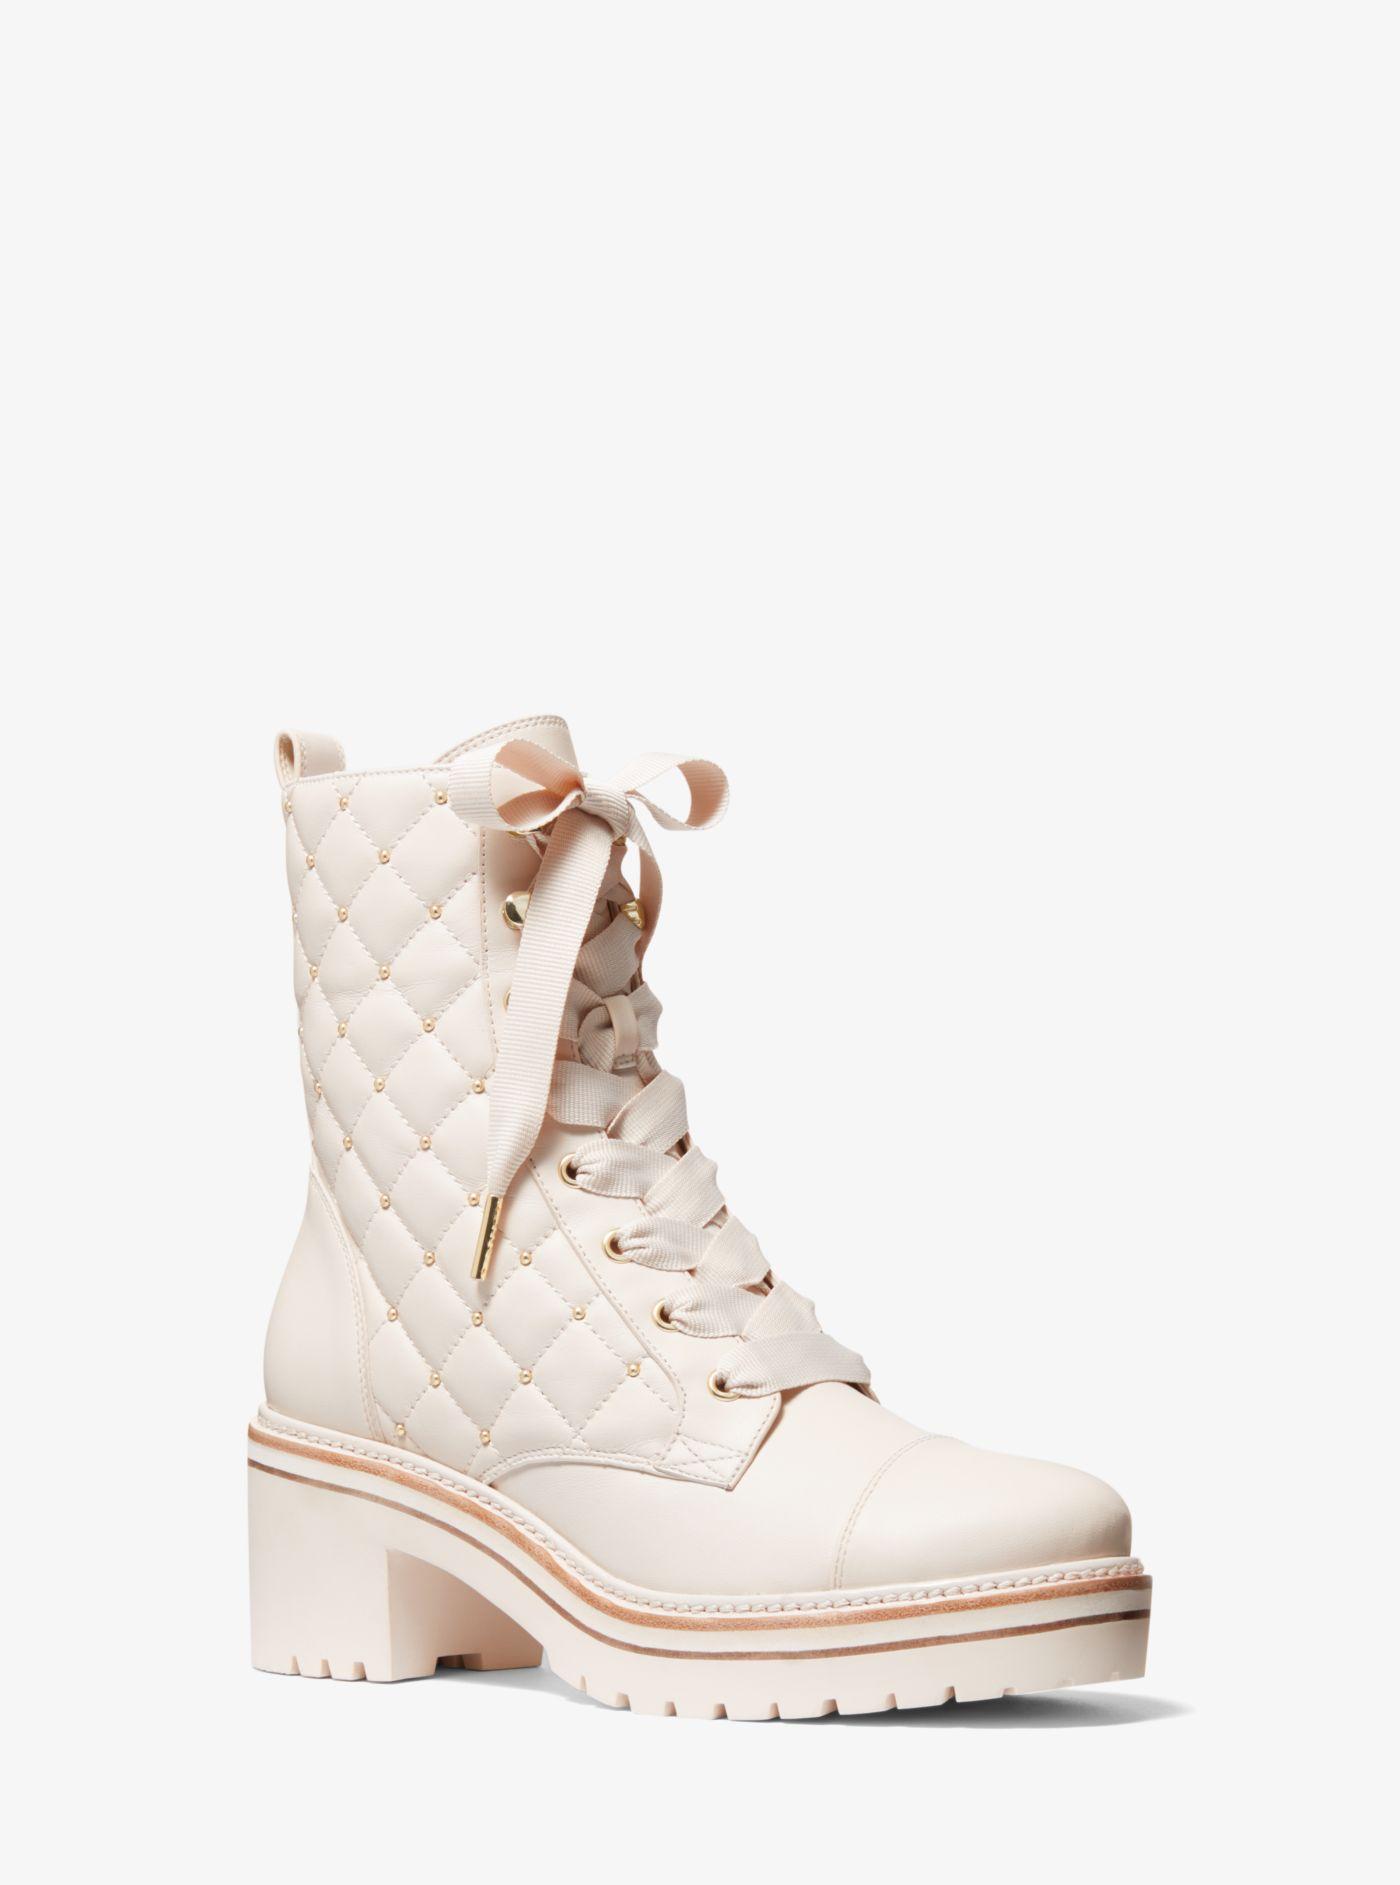 Michael Kors Tilda Quilted Leather Combat Boot in Natural | Lyst